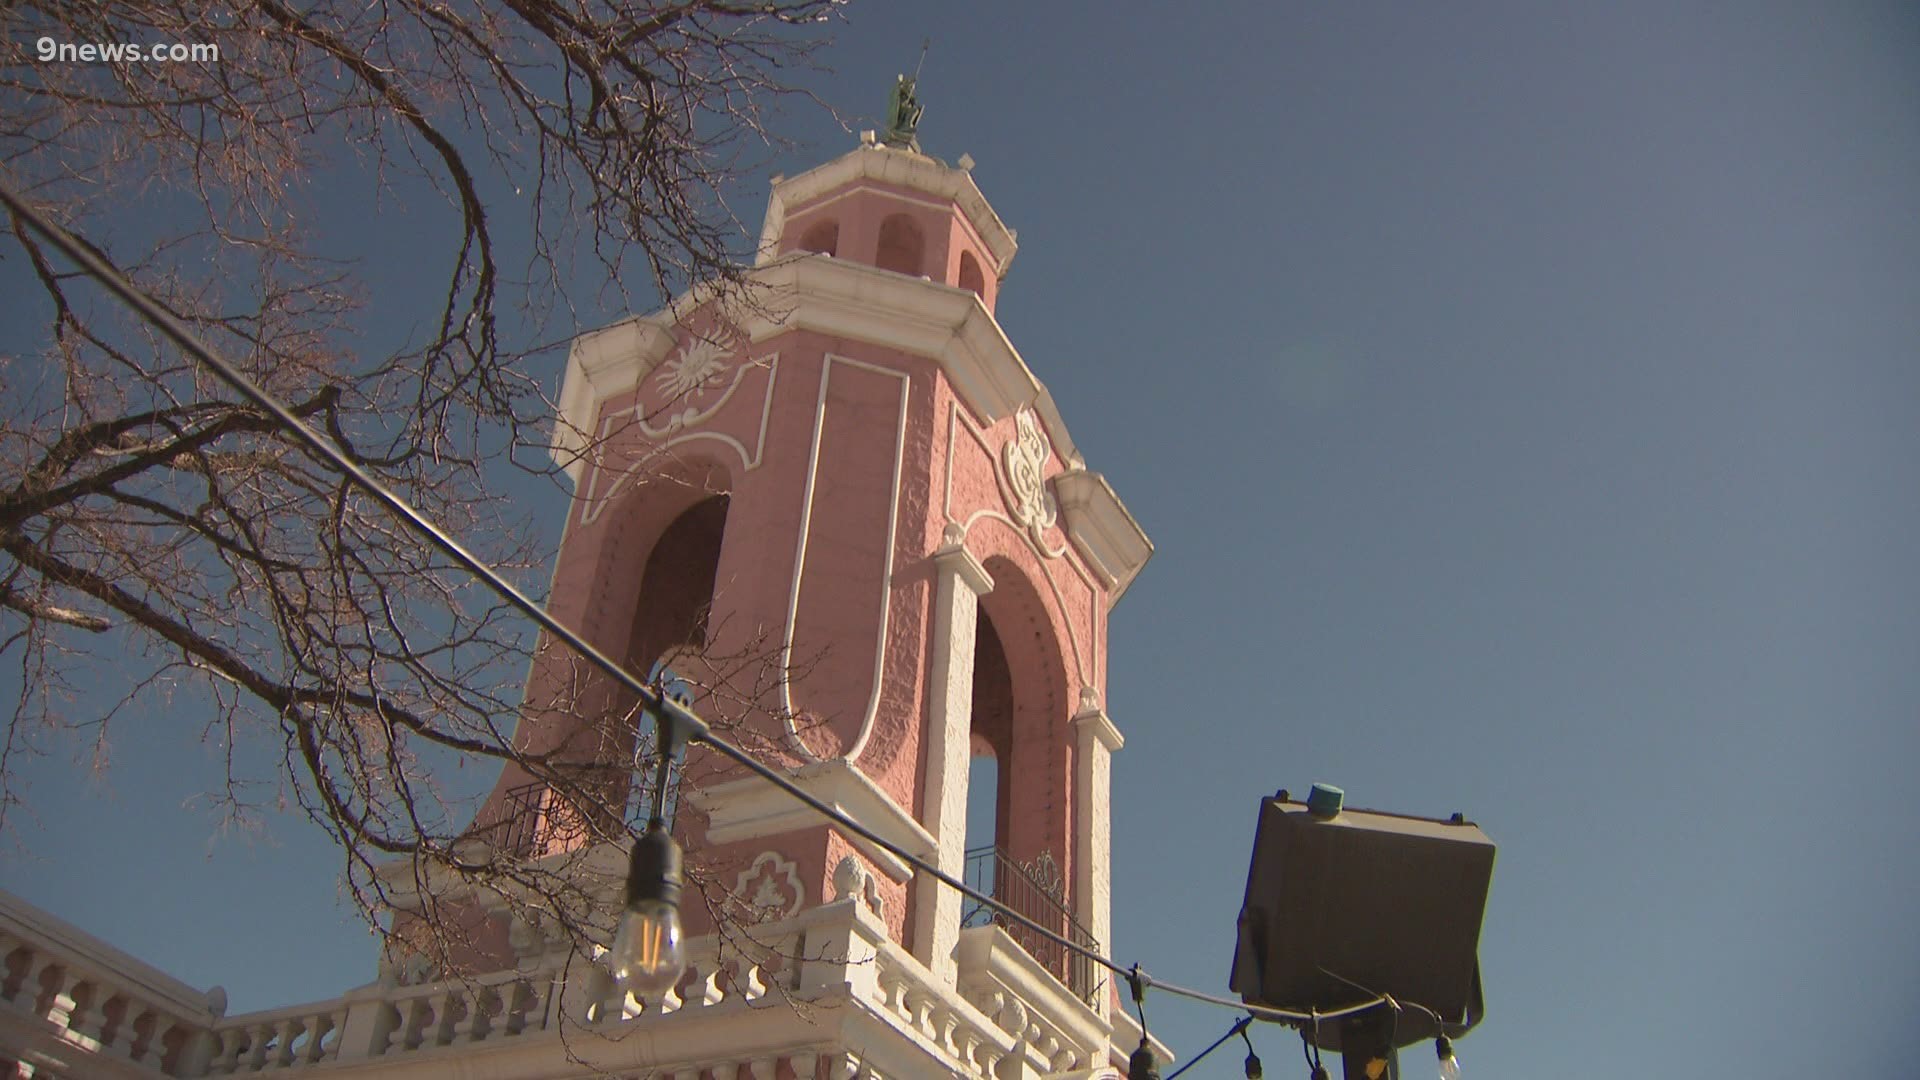 Casa Bonita's website recently resurfaced with a message that said the business would reopen soon, but repeated messages to the restaurant have gone unanswered.